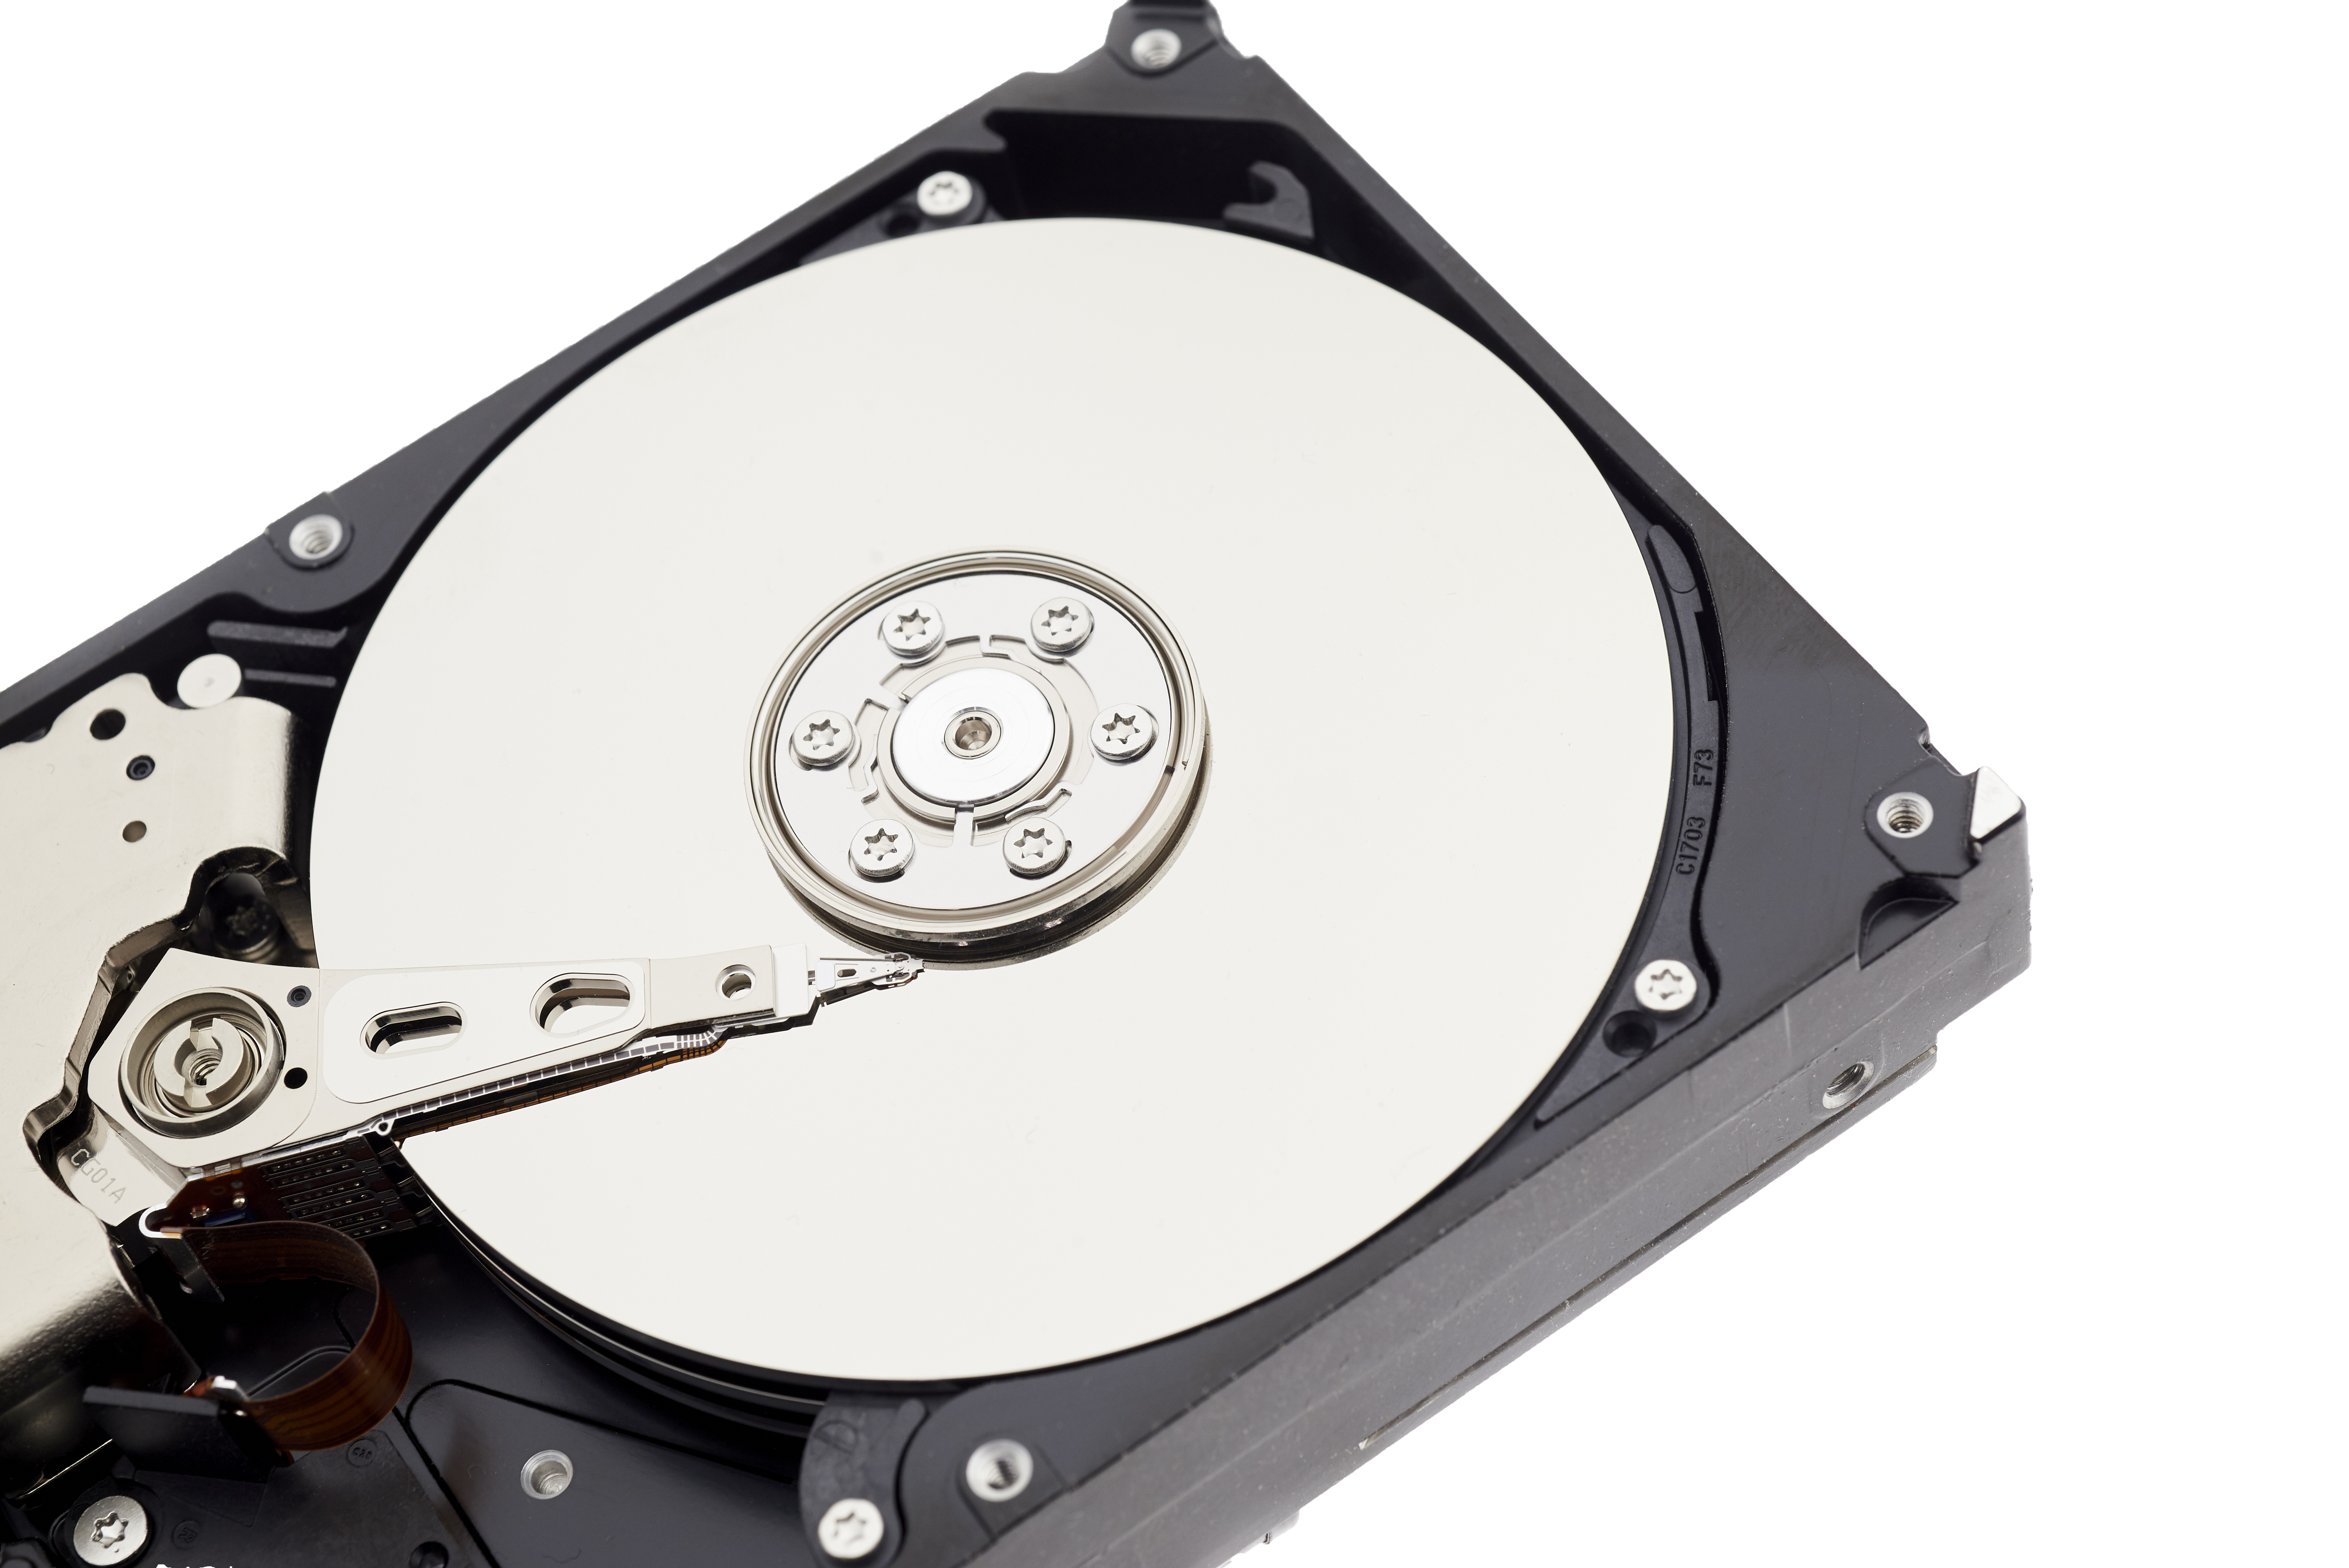 Open hard drive with platter visible